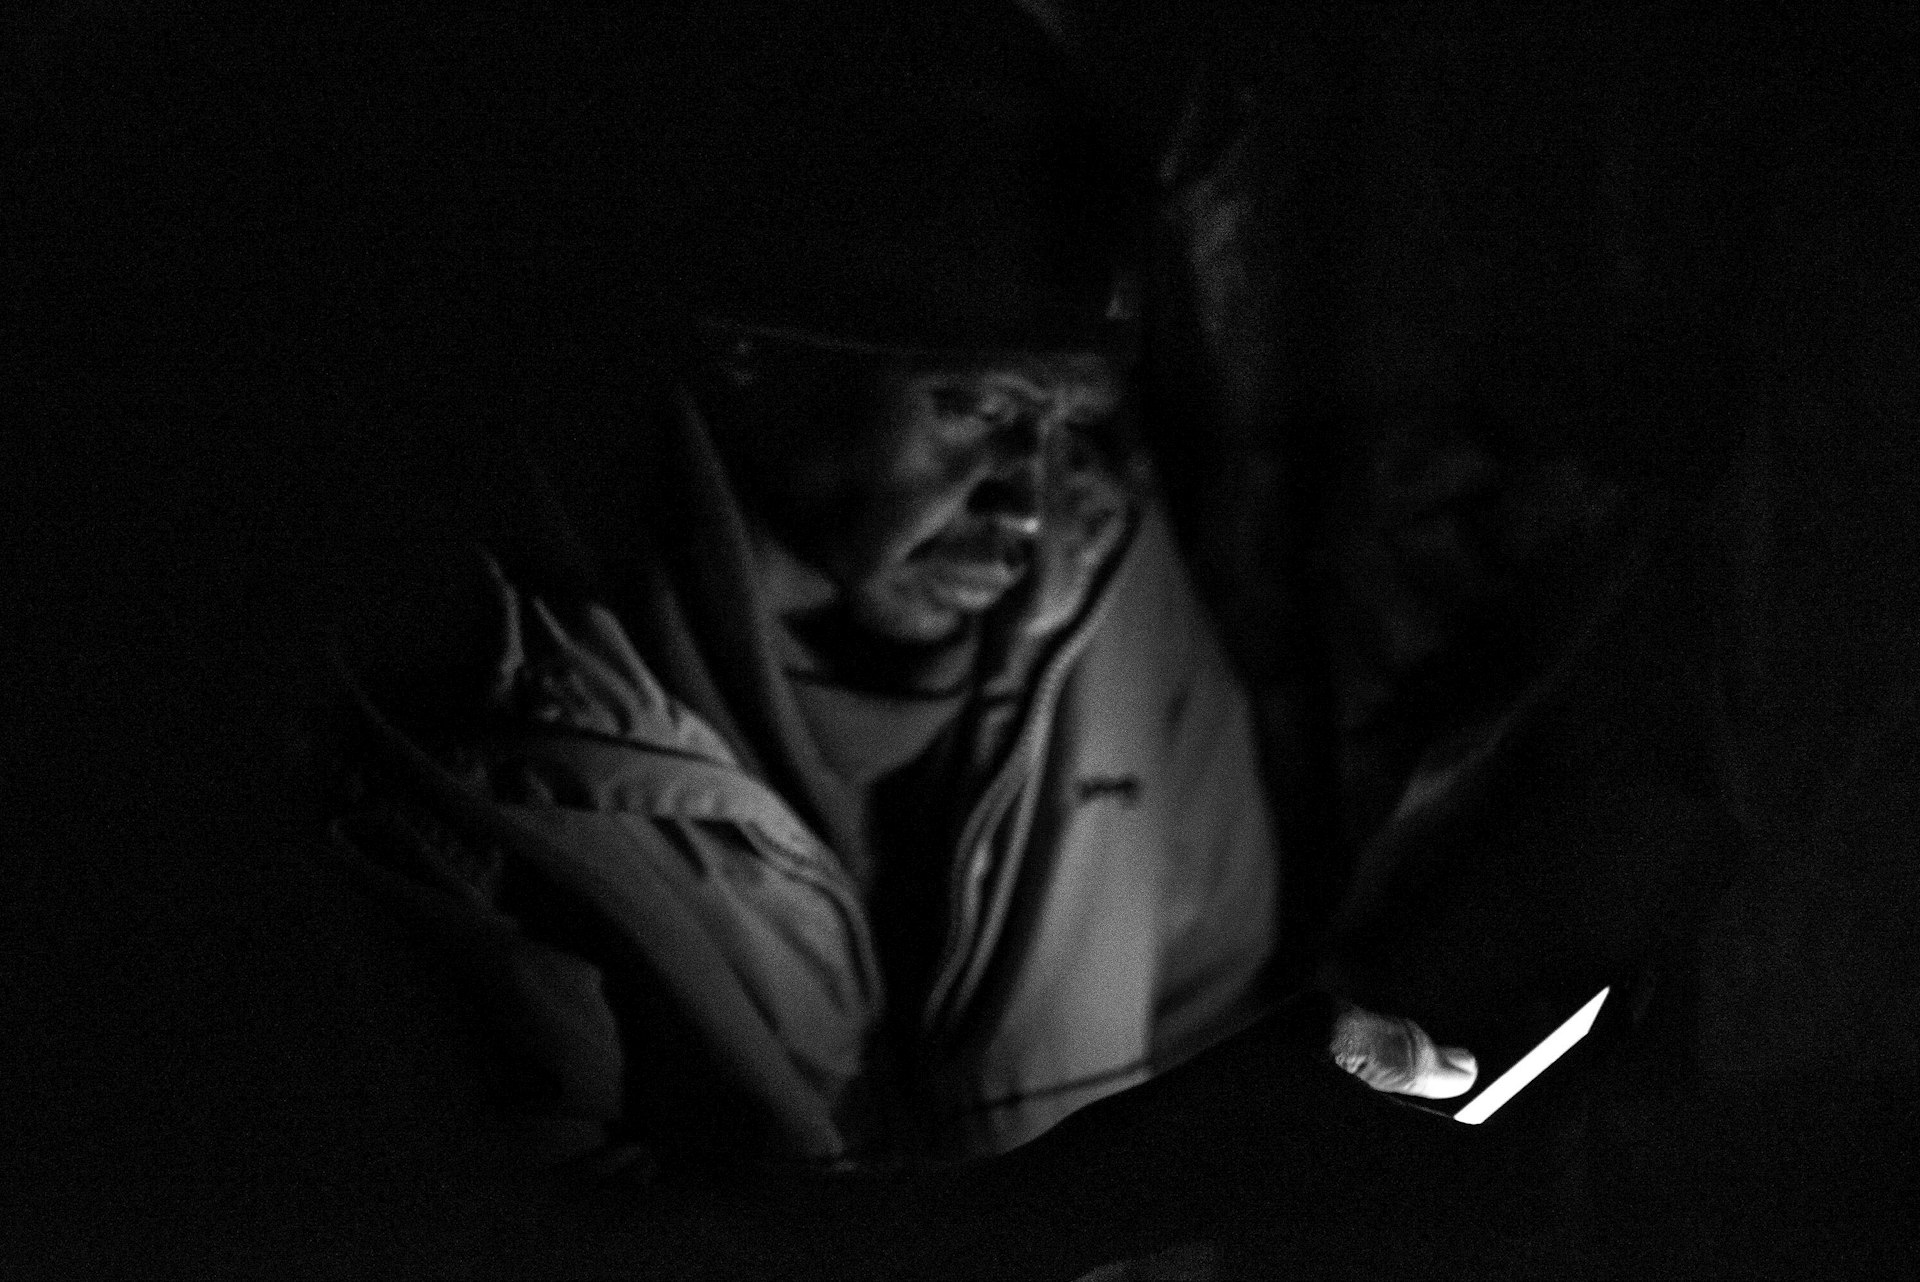 In the evening Ahmad stays in his shelter, using his phone to speak with relatives and friends. 